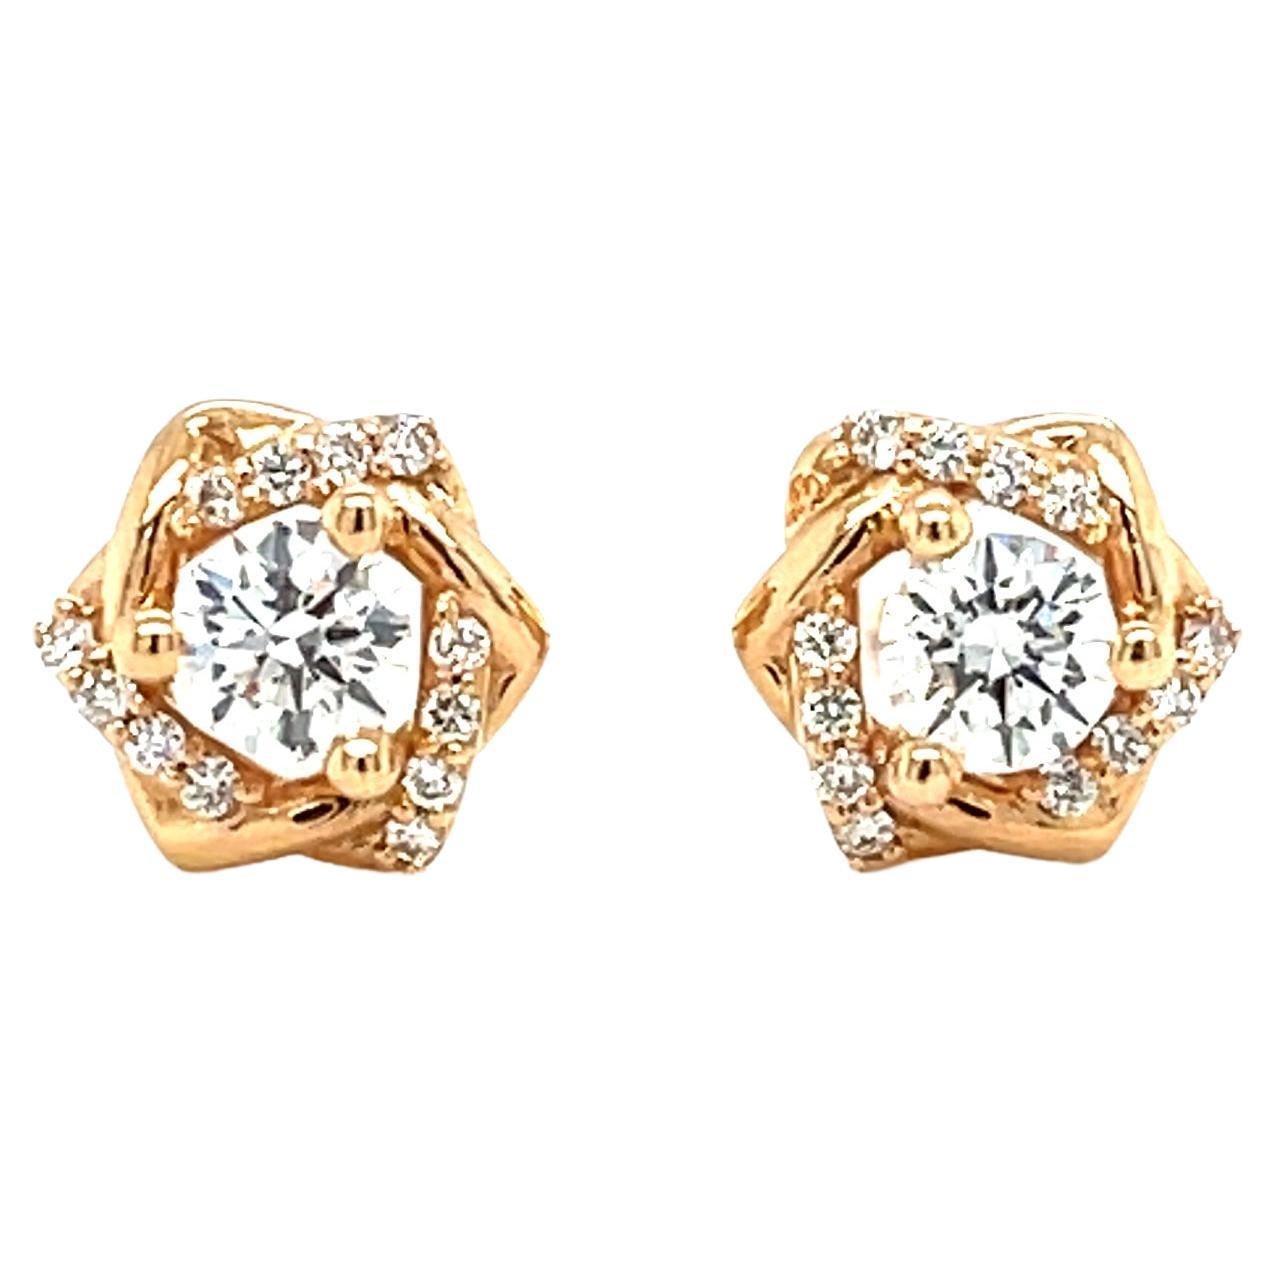 Pair of E VVS2 Round Diamonds 0.62 Carats in 18K Rose Gold  GIA Certified For Sale